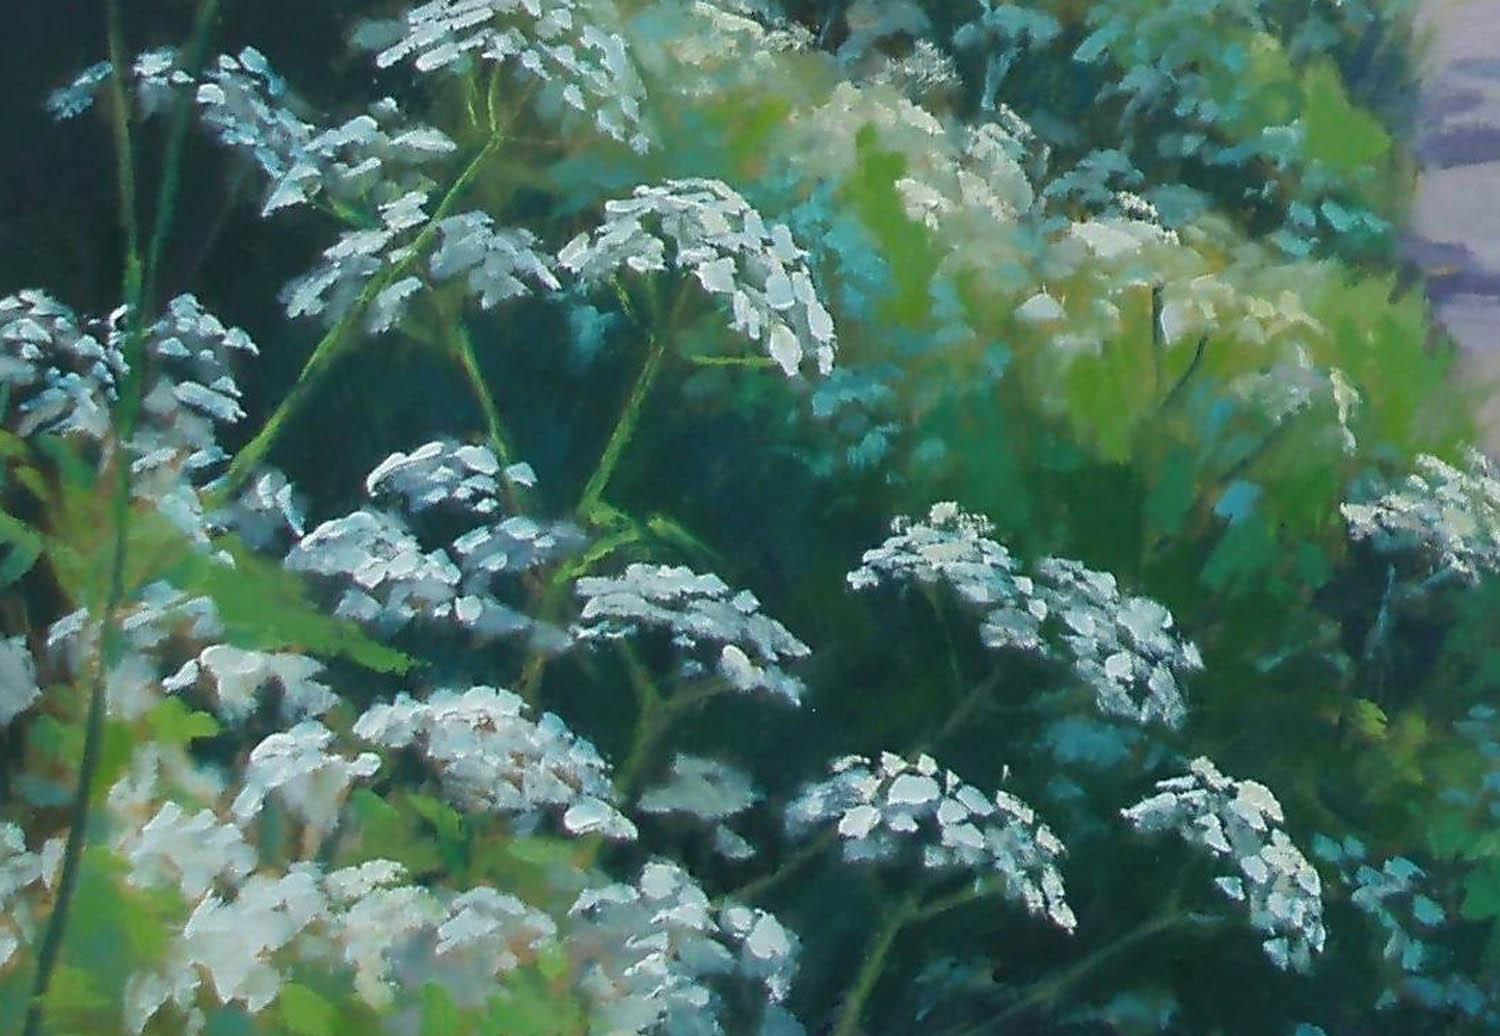 Cow Parsley in May - Painting by Andrea Bates